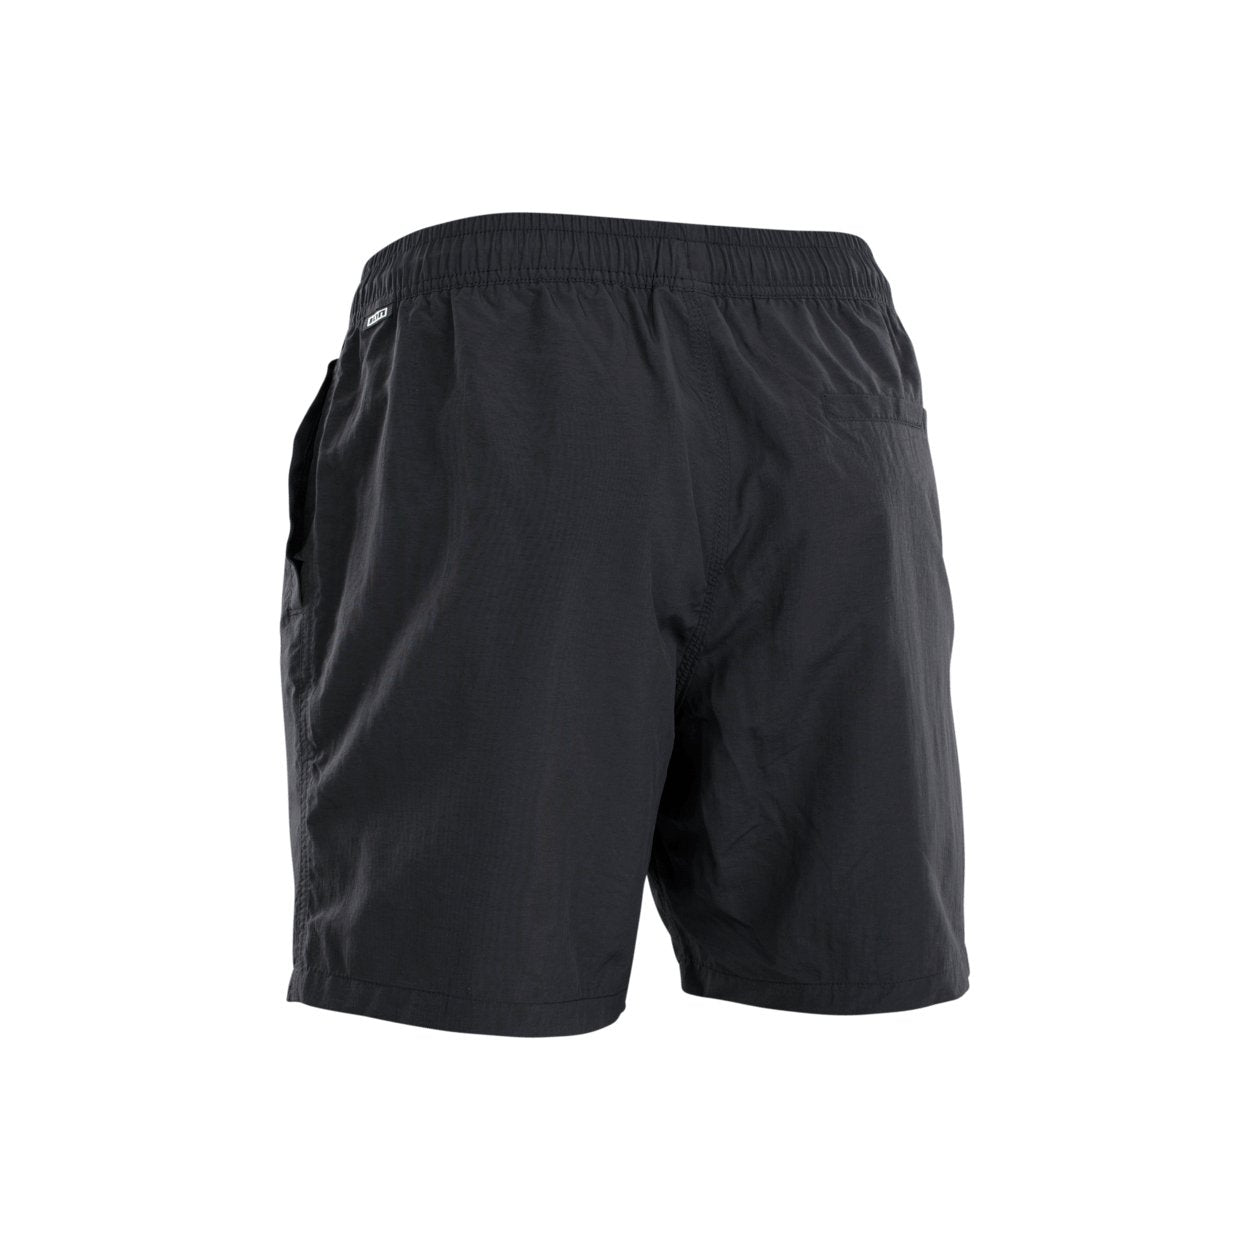 ION Men Boardshorts Volley 17" 2022 - Worthing Watersports - 9008415902620 - Apparel - ION Bike